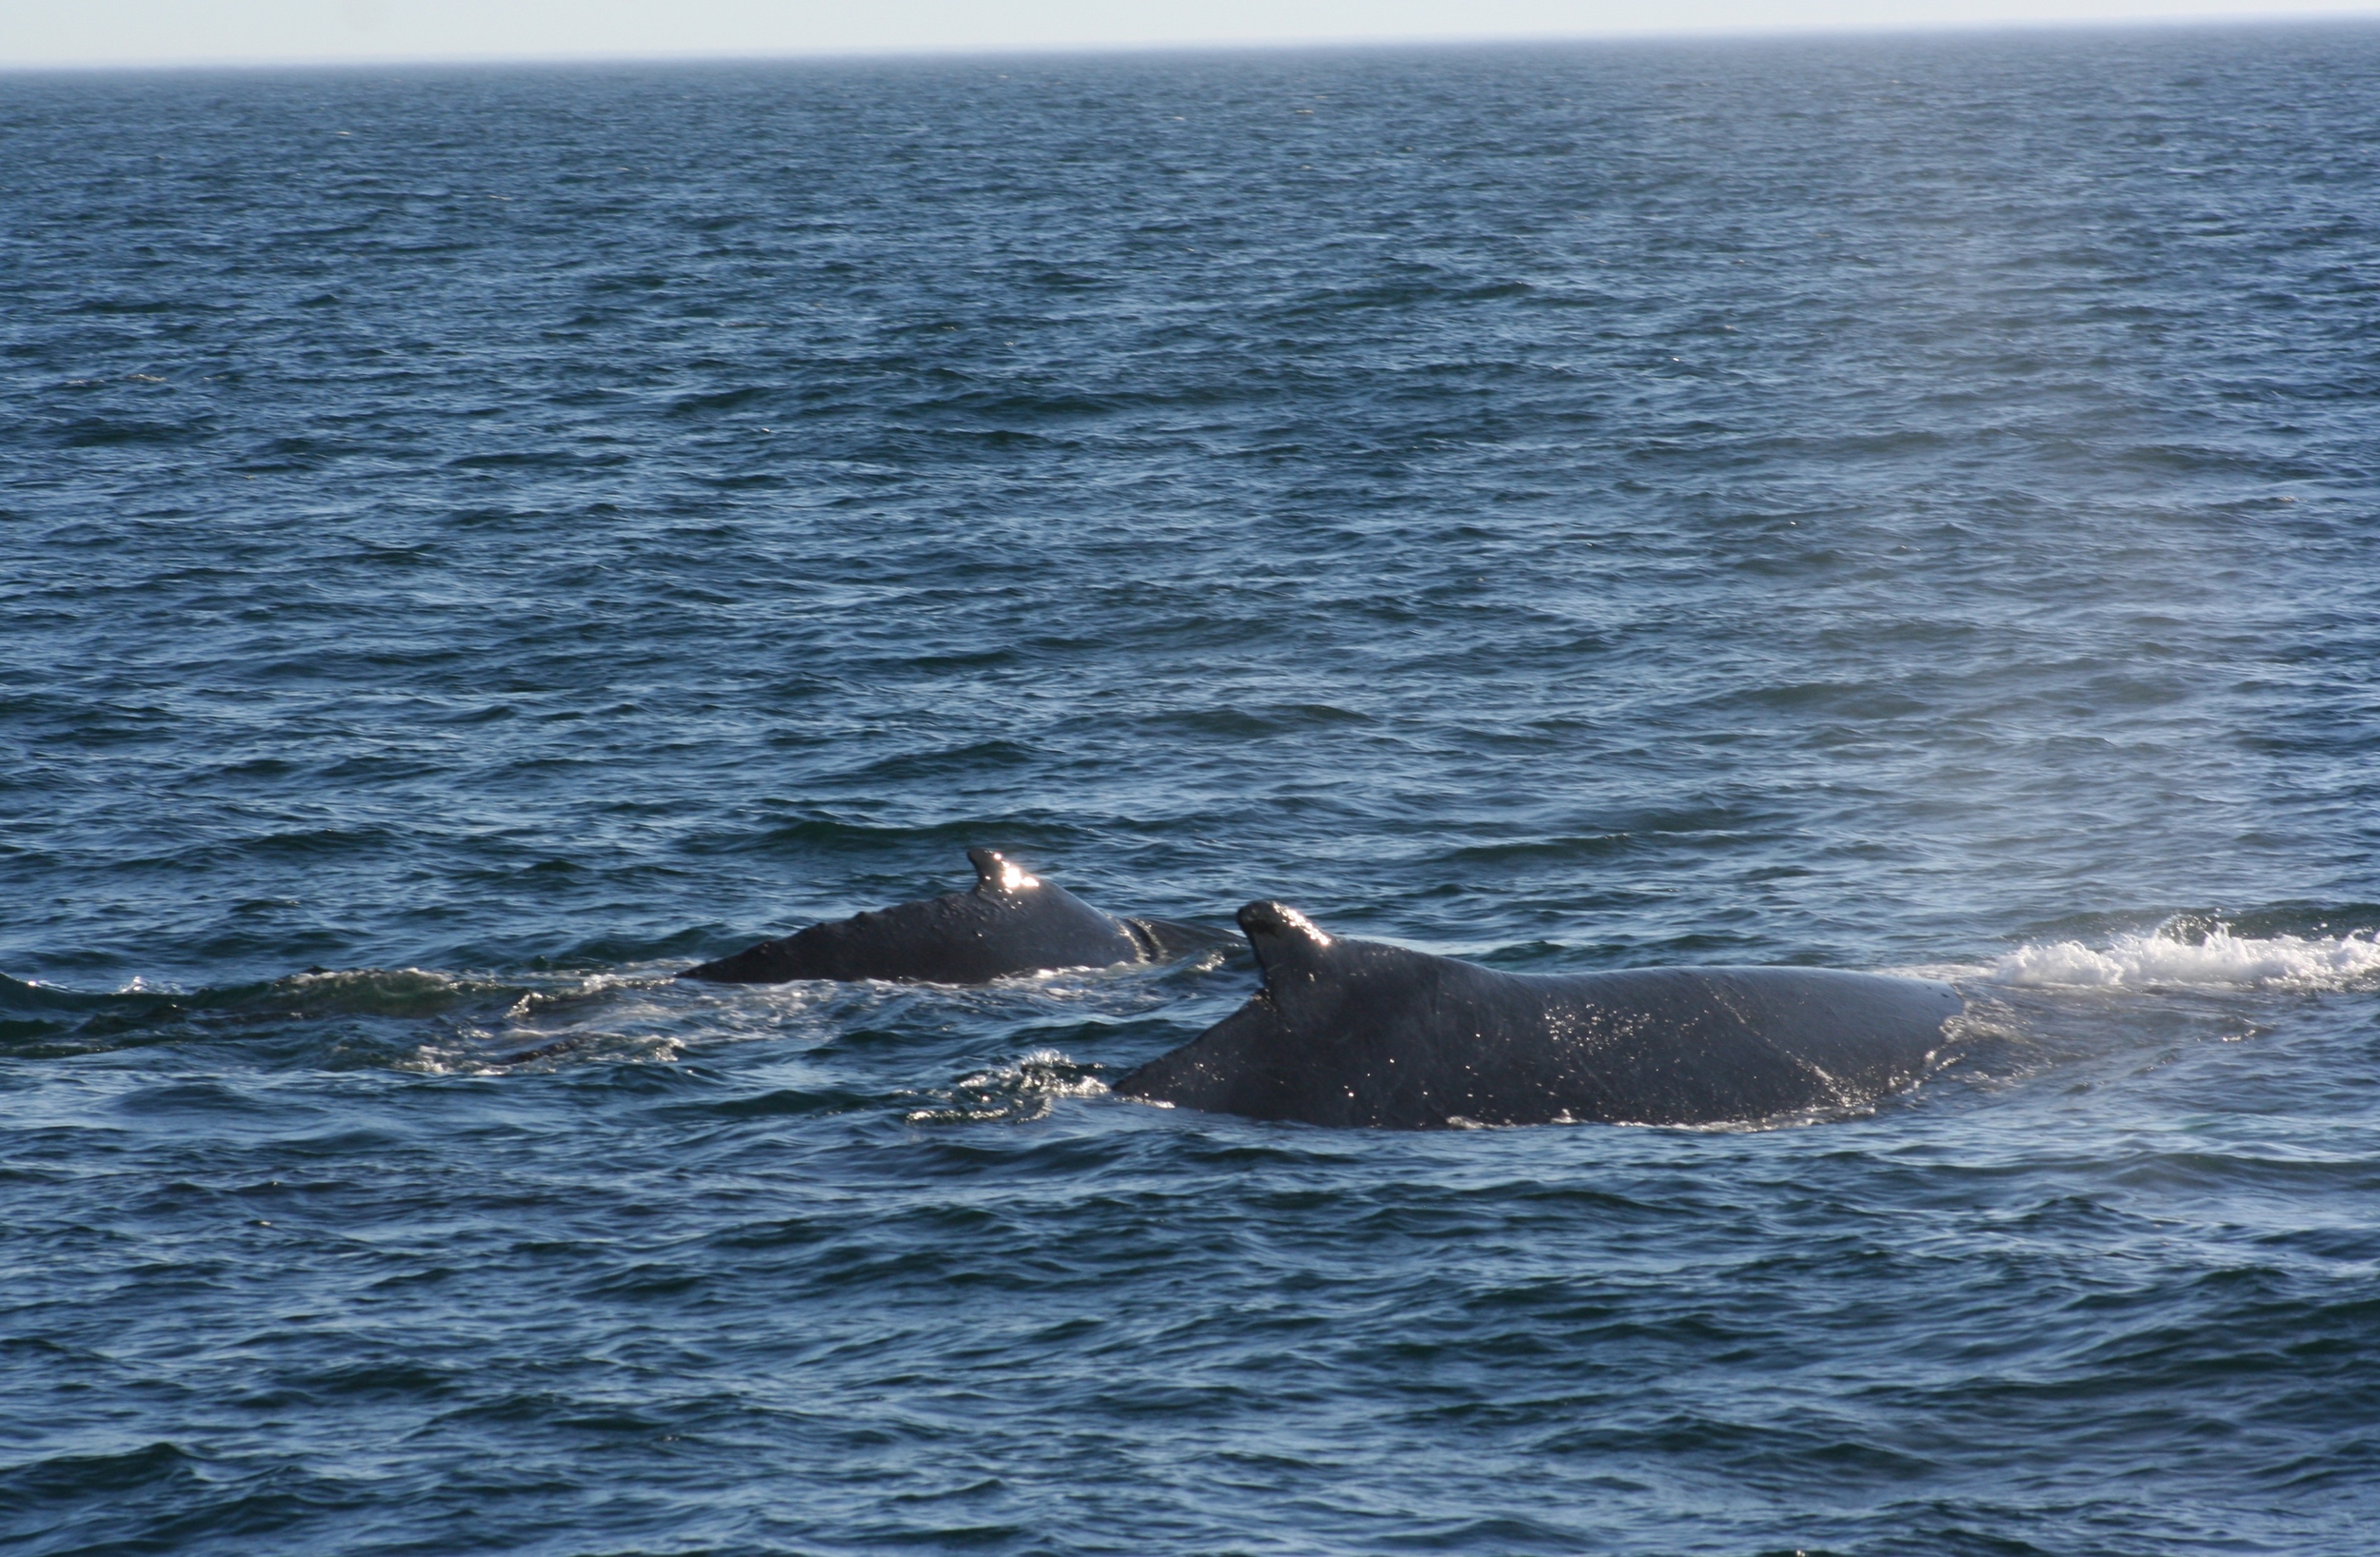  Mama and baby humpback whales 